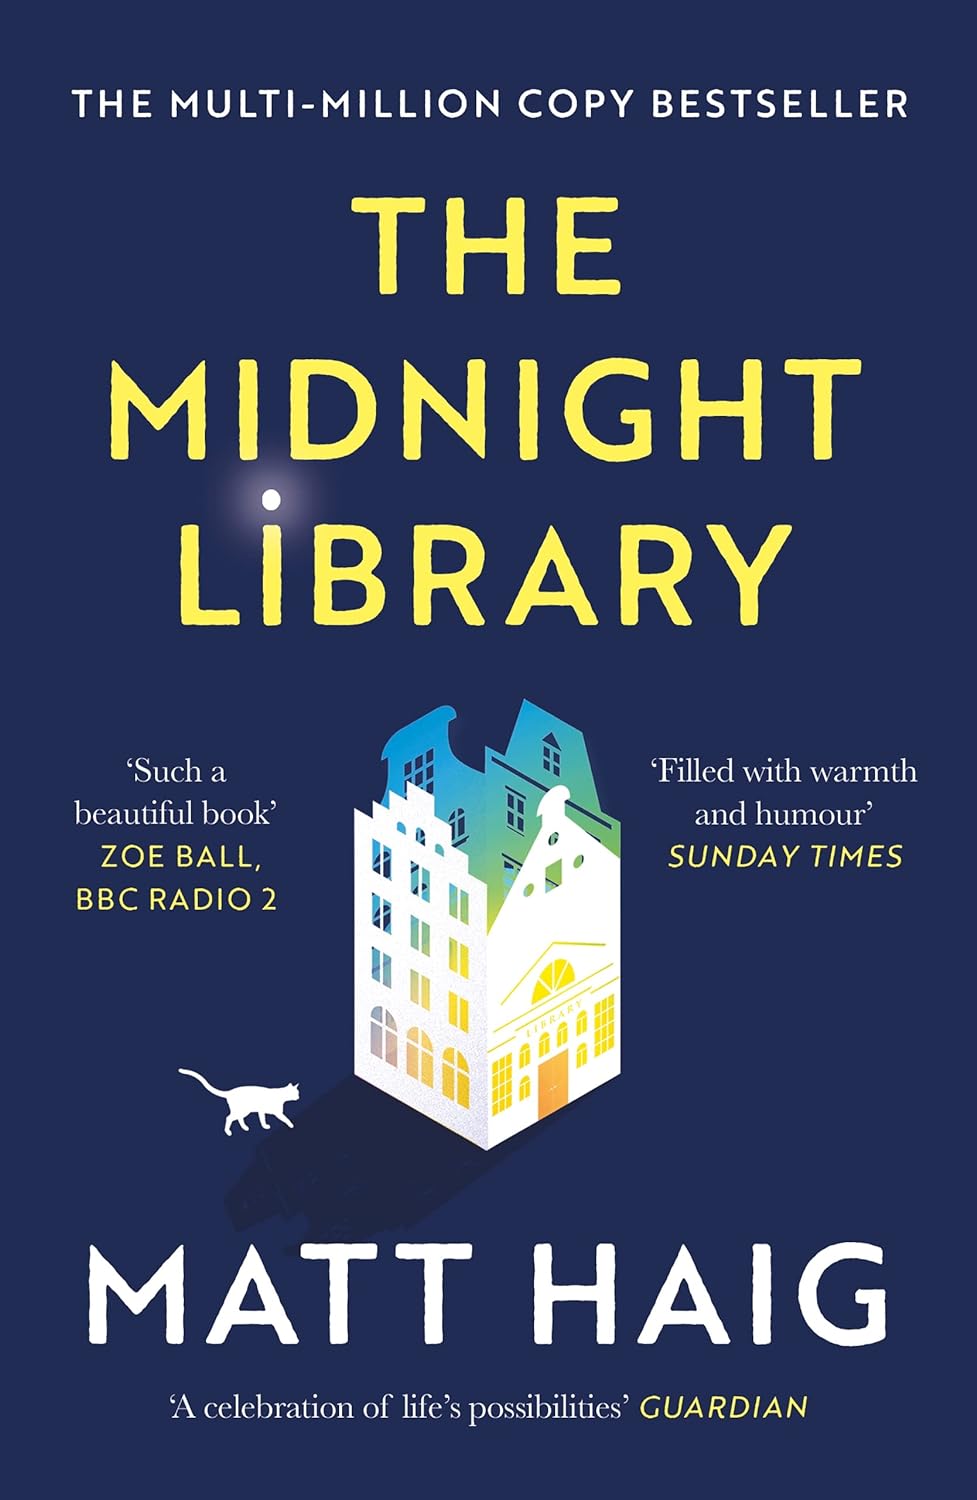 Cover of "The Midnight Library" by Matt Haig